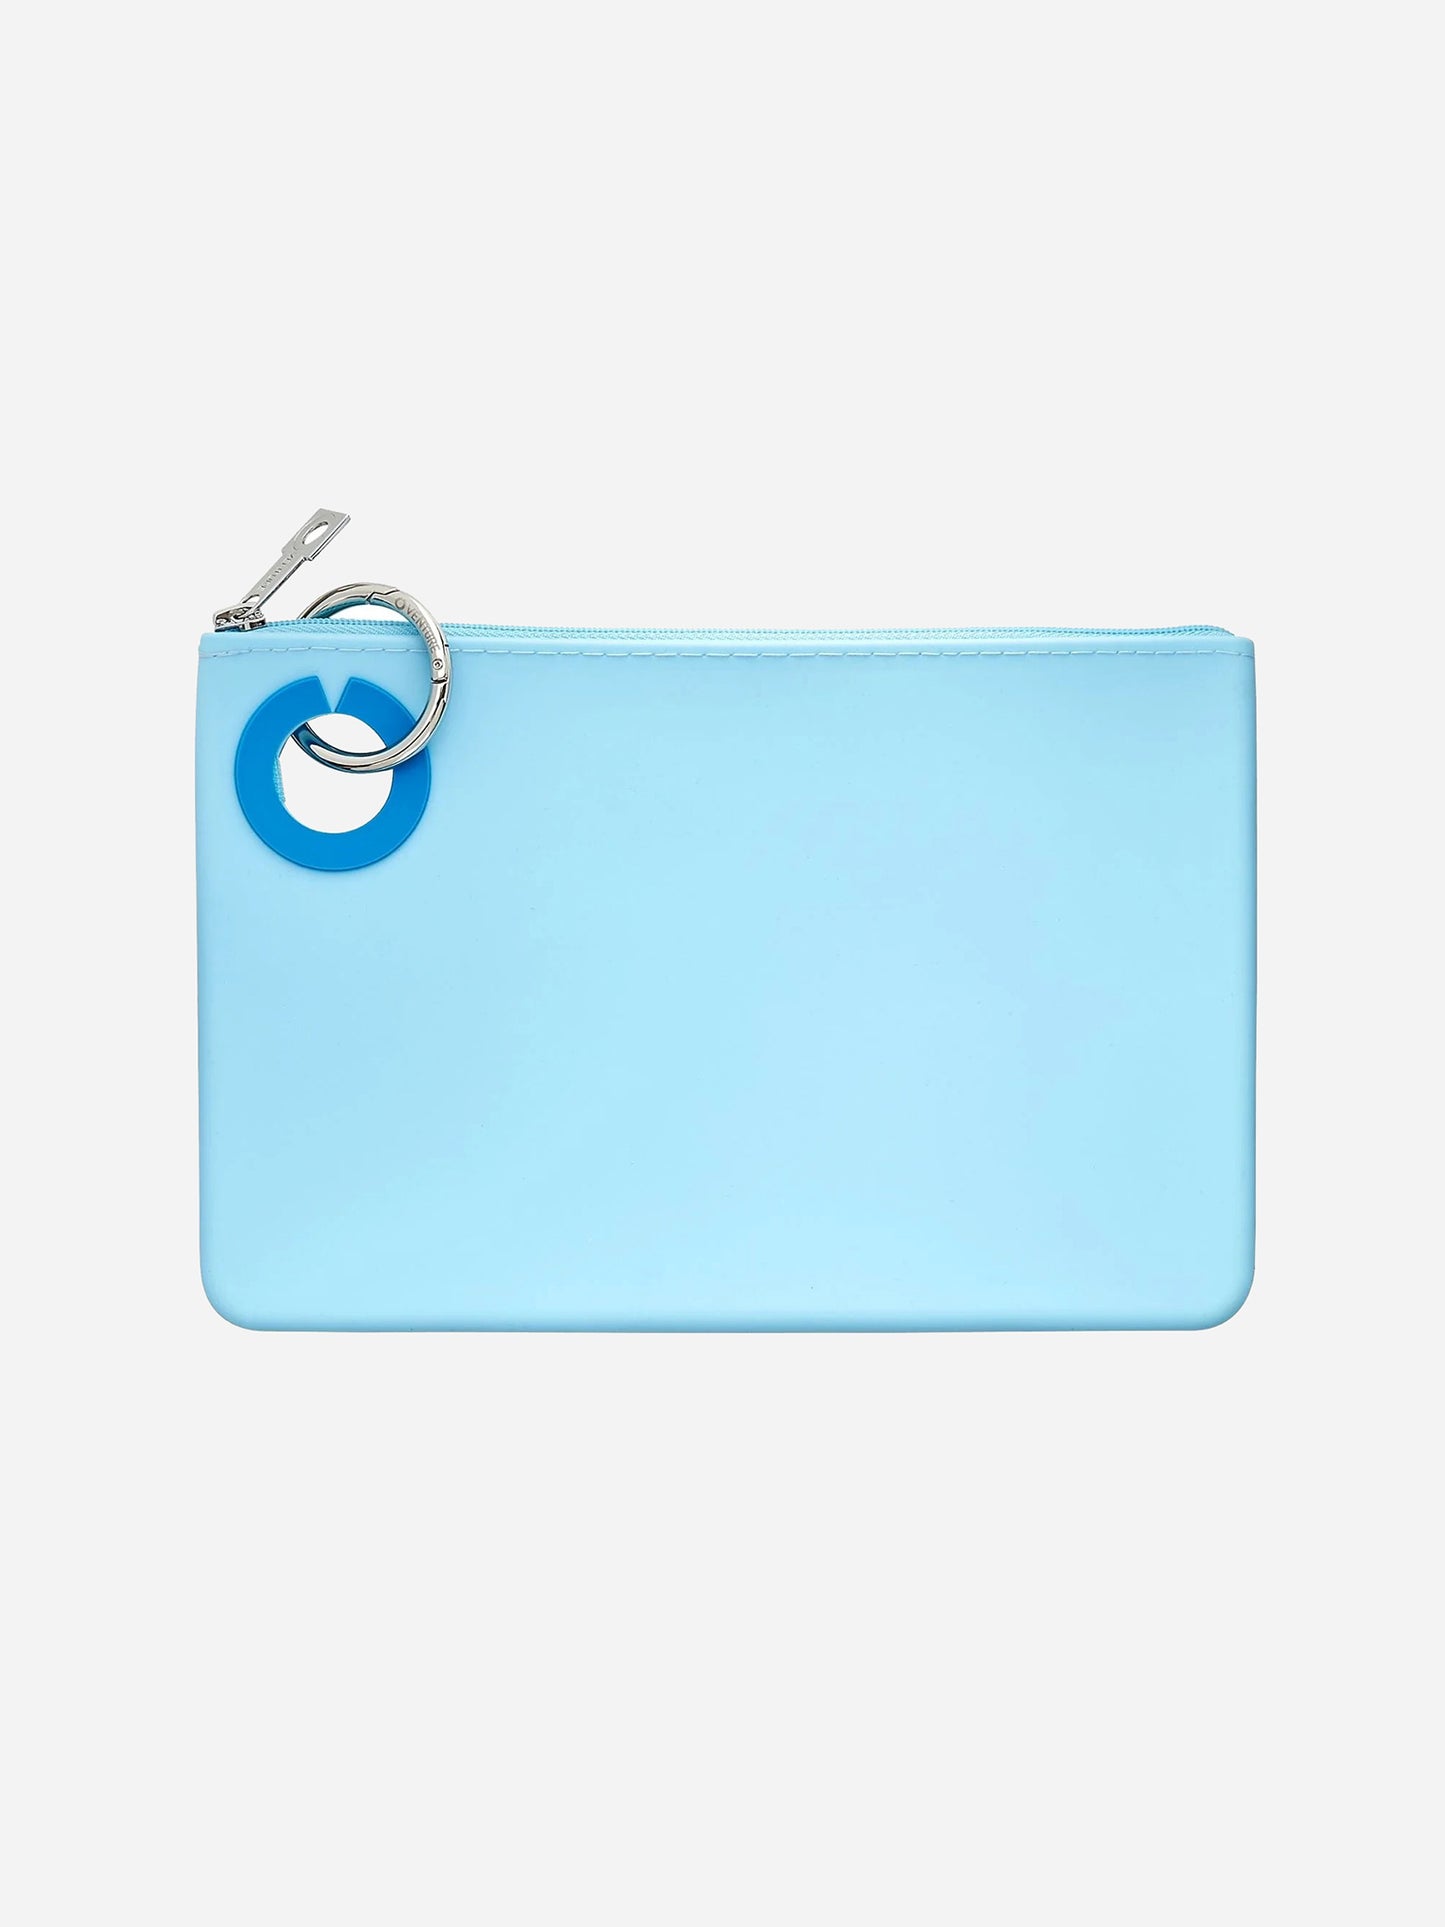 O-Venture Large Silicone Pouch